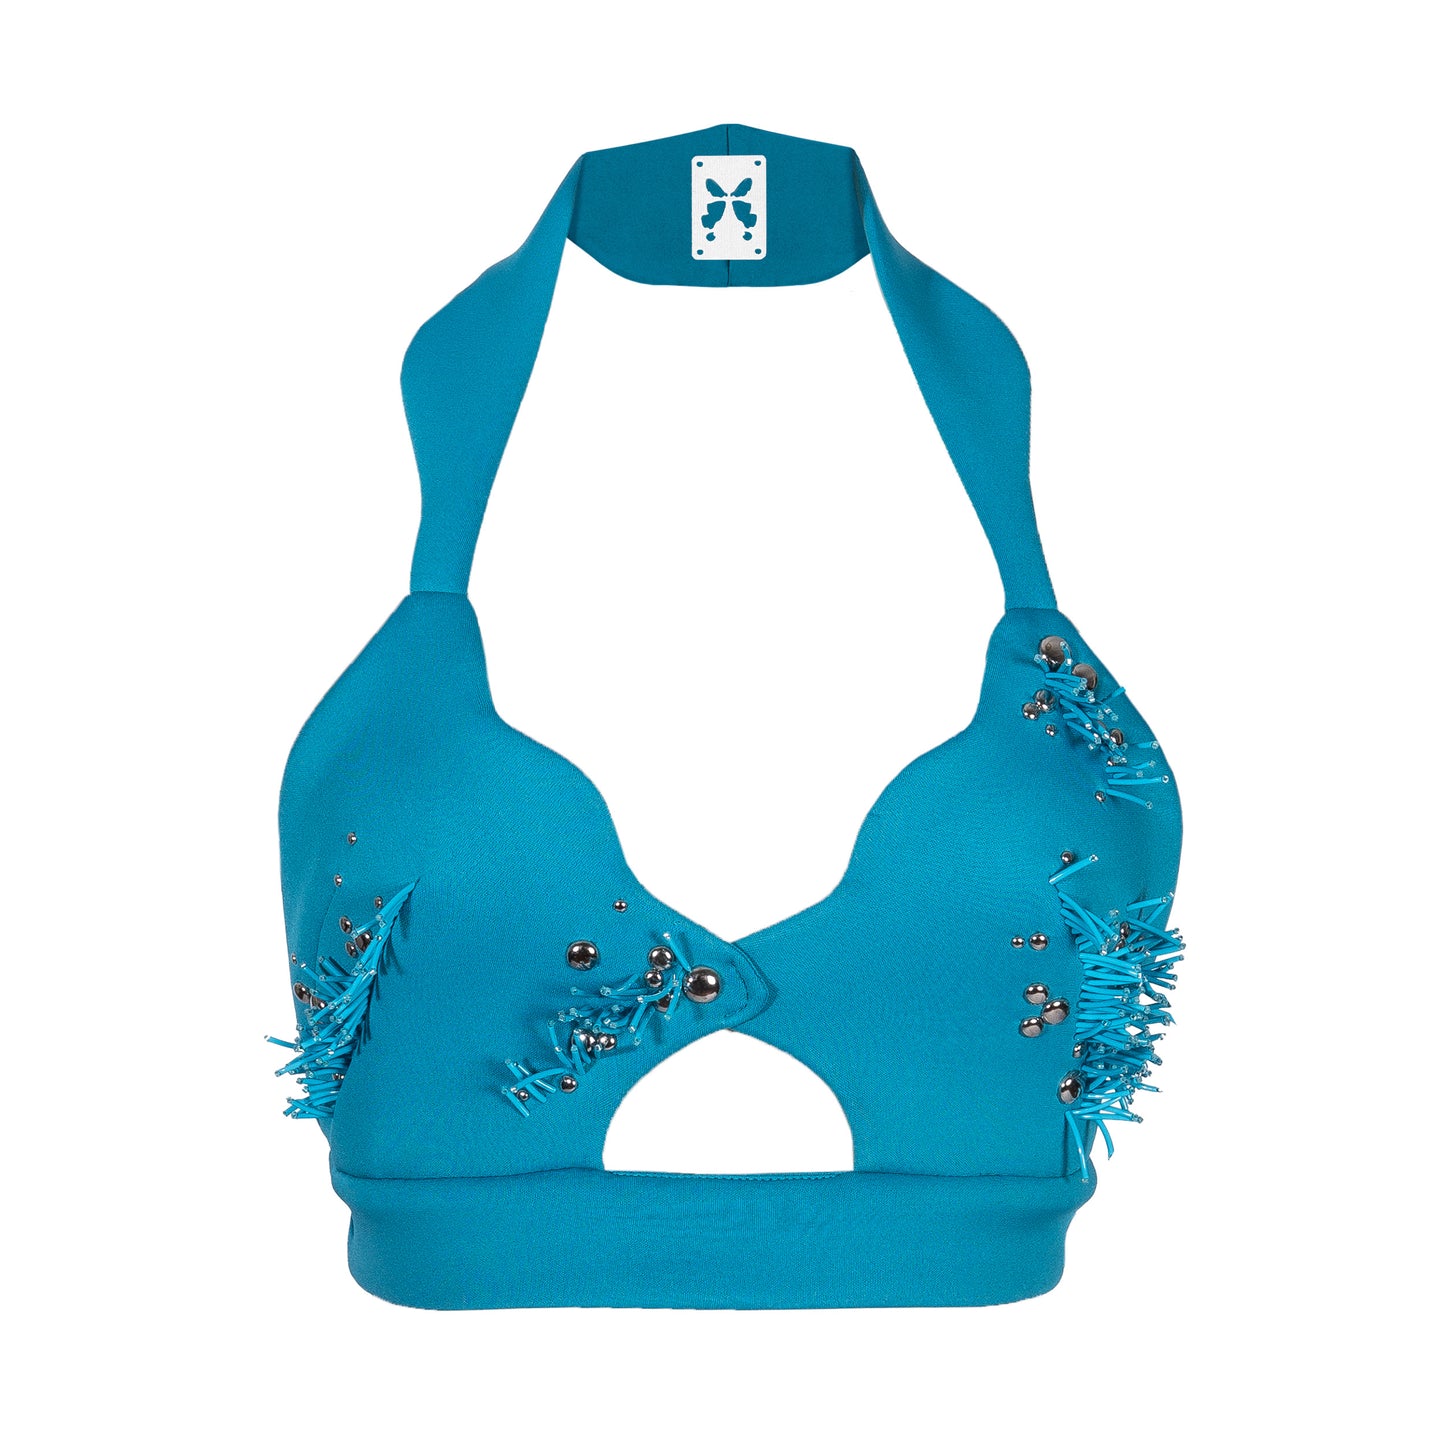 ARTA, turquoise brassiere with abstract embroidery